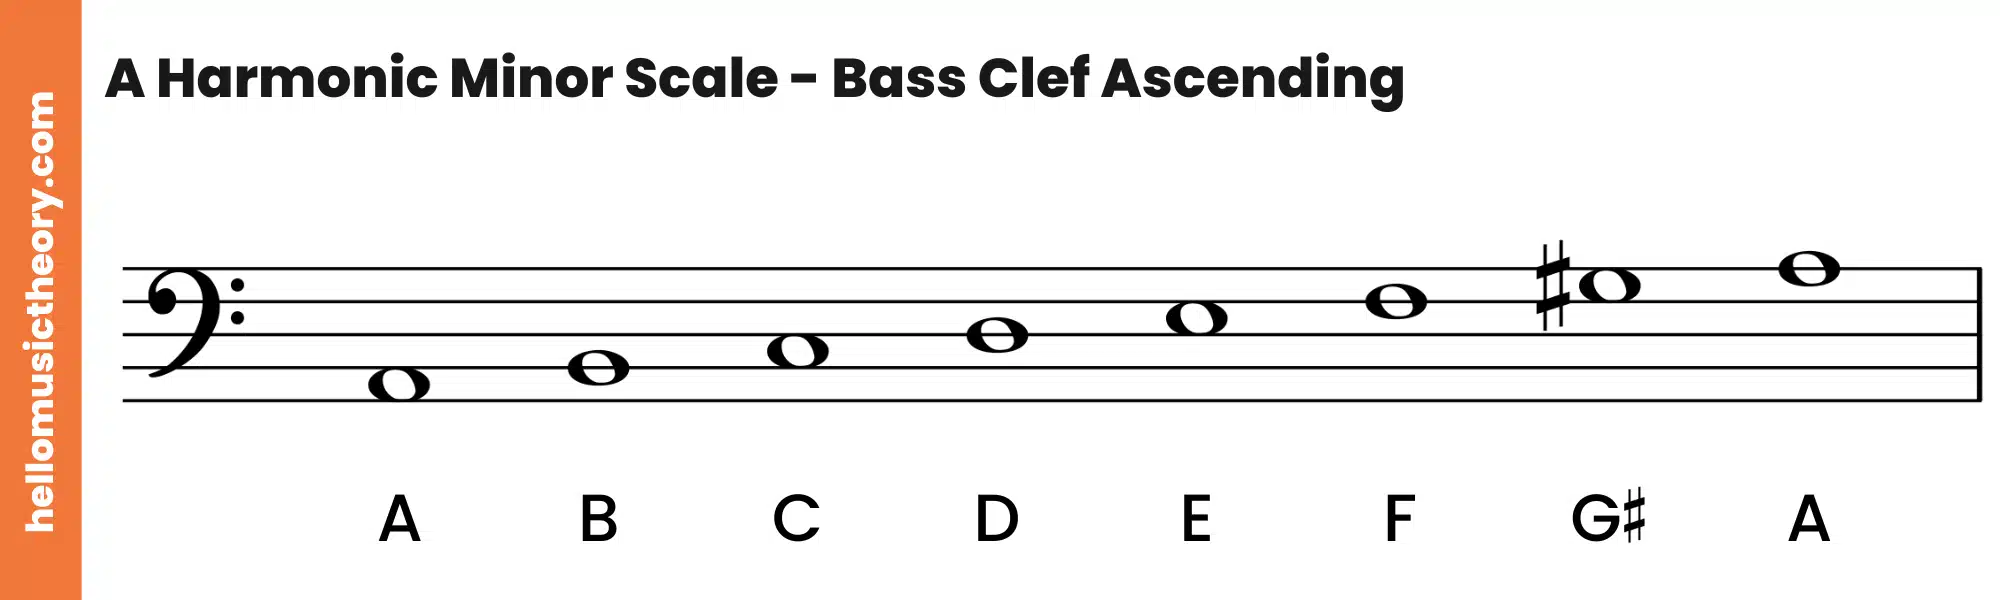 A Harmonic Minor Scale Bass Clef Ascending